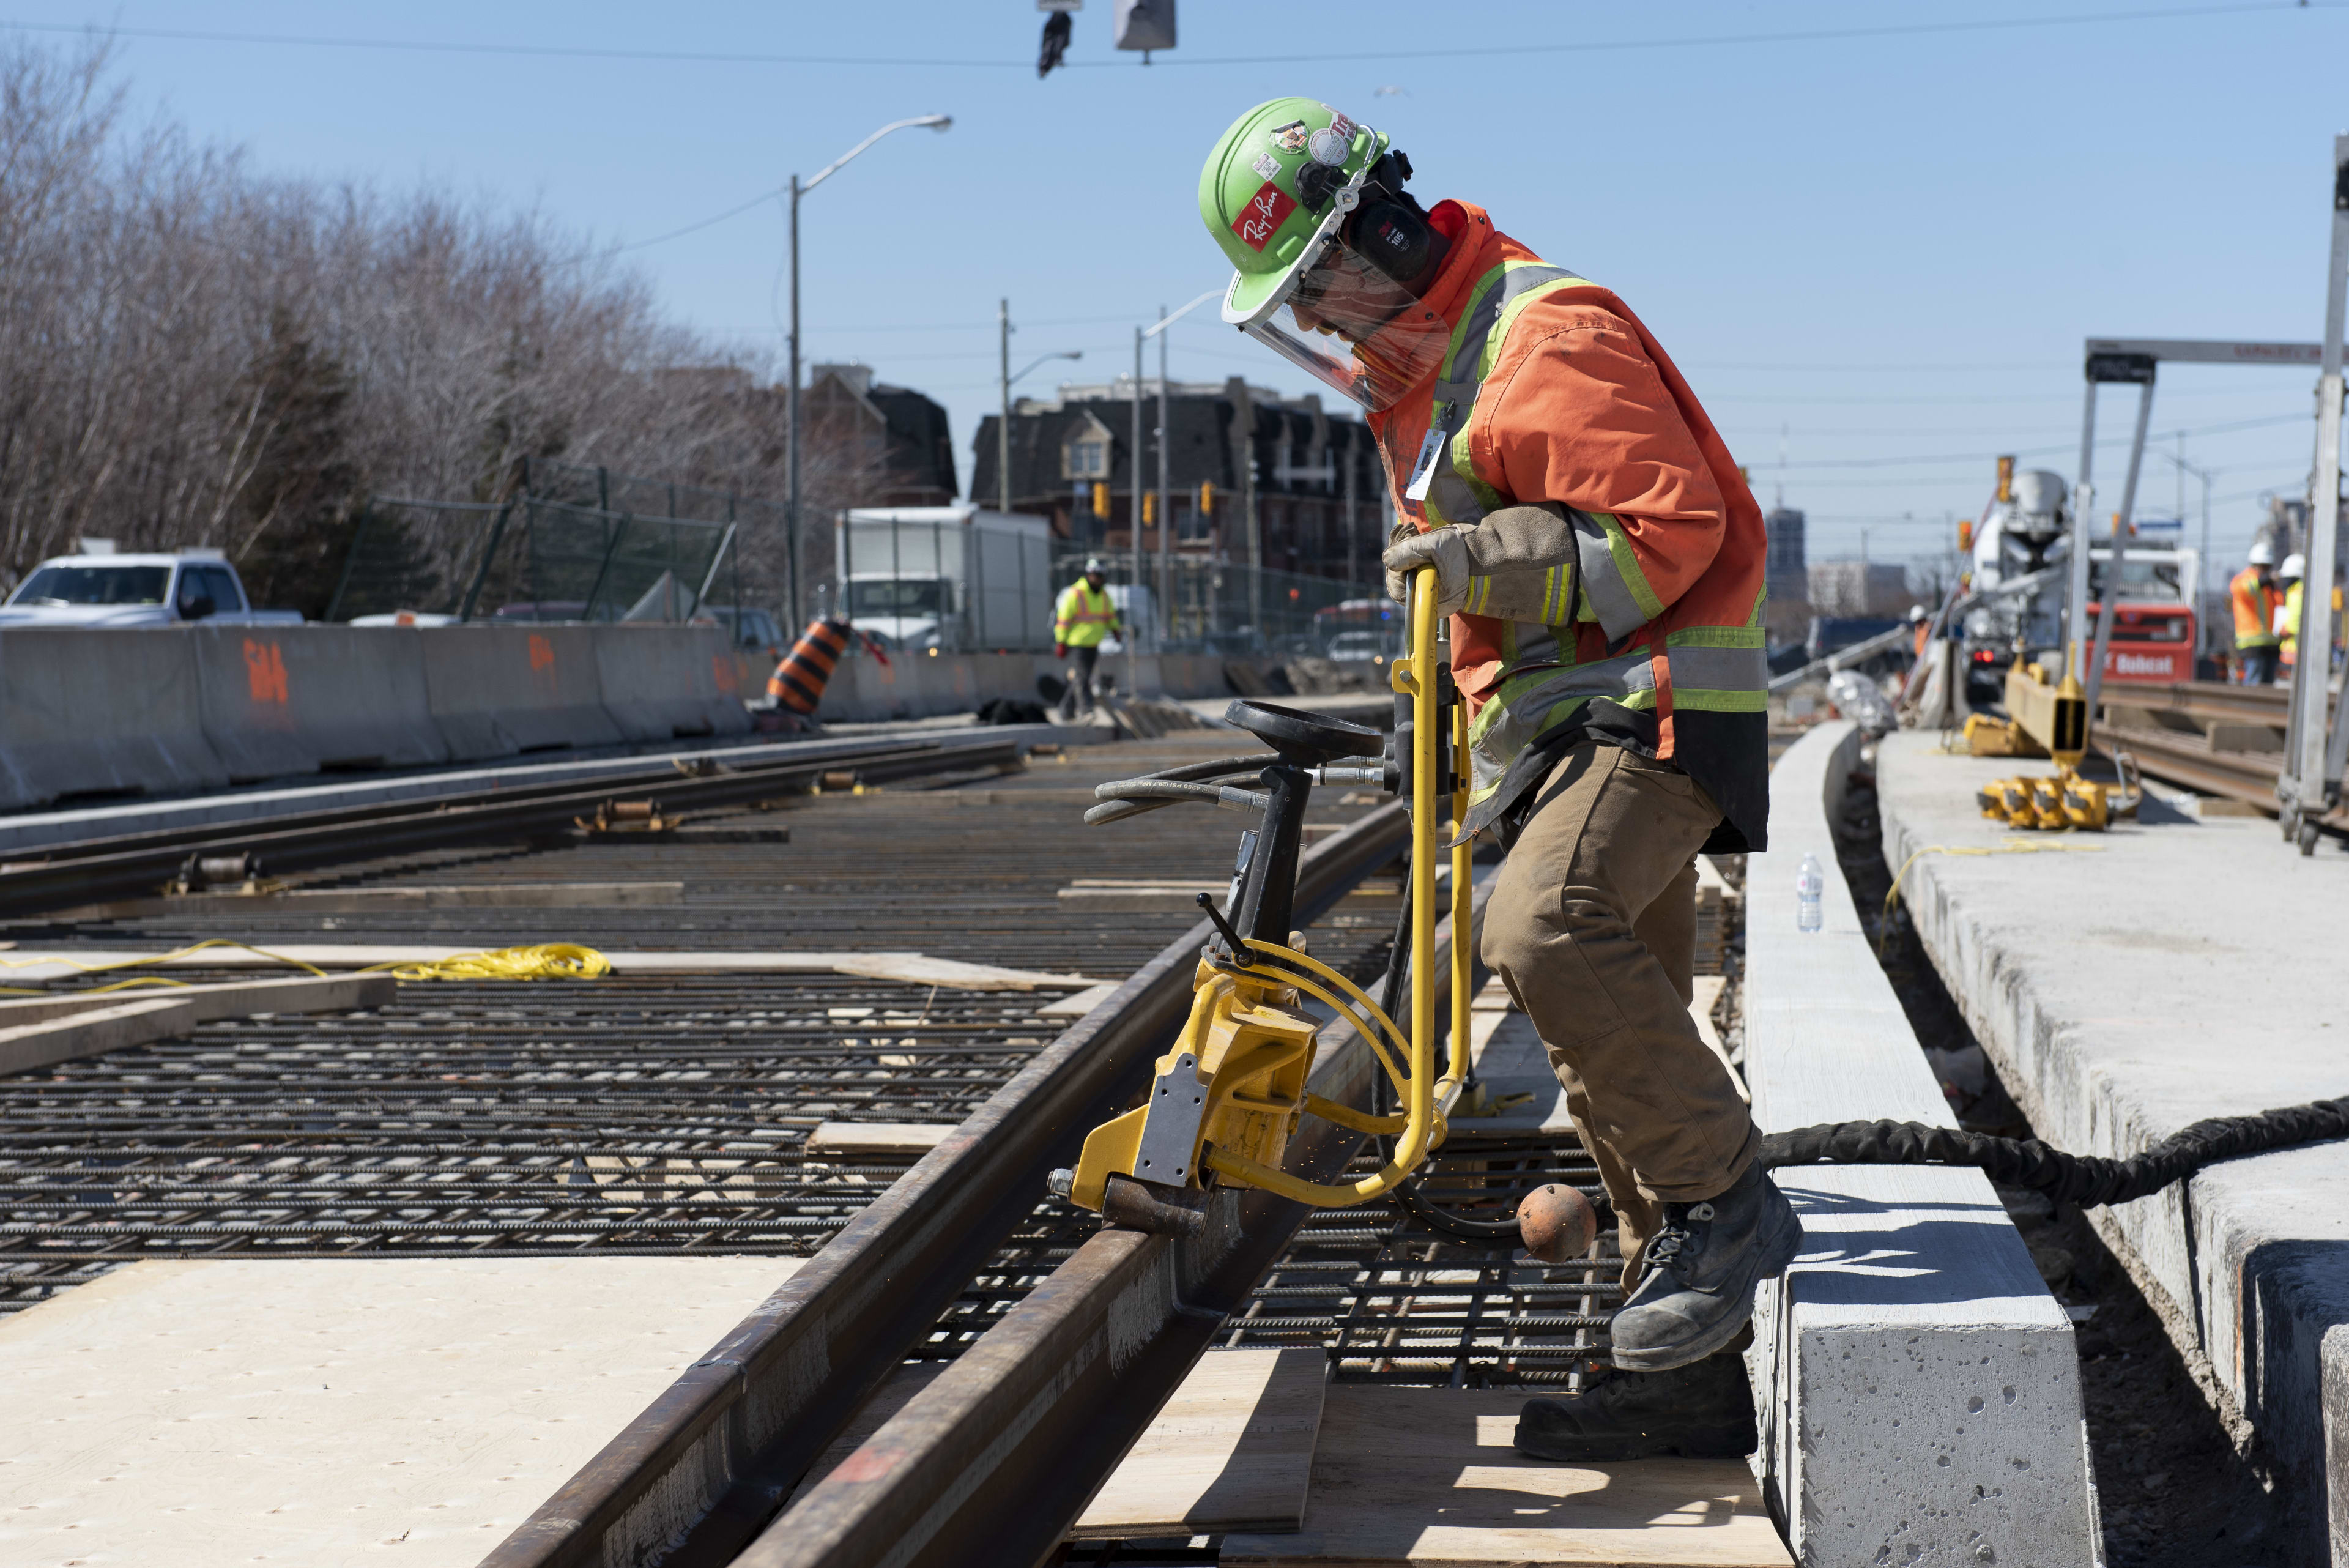 A crew meber uses a large tool to adjust a piece of track.